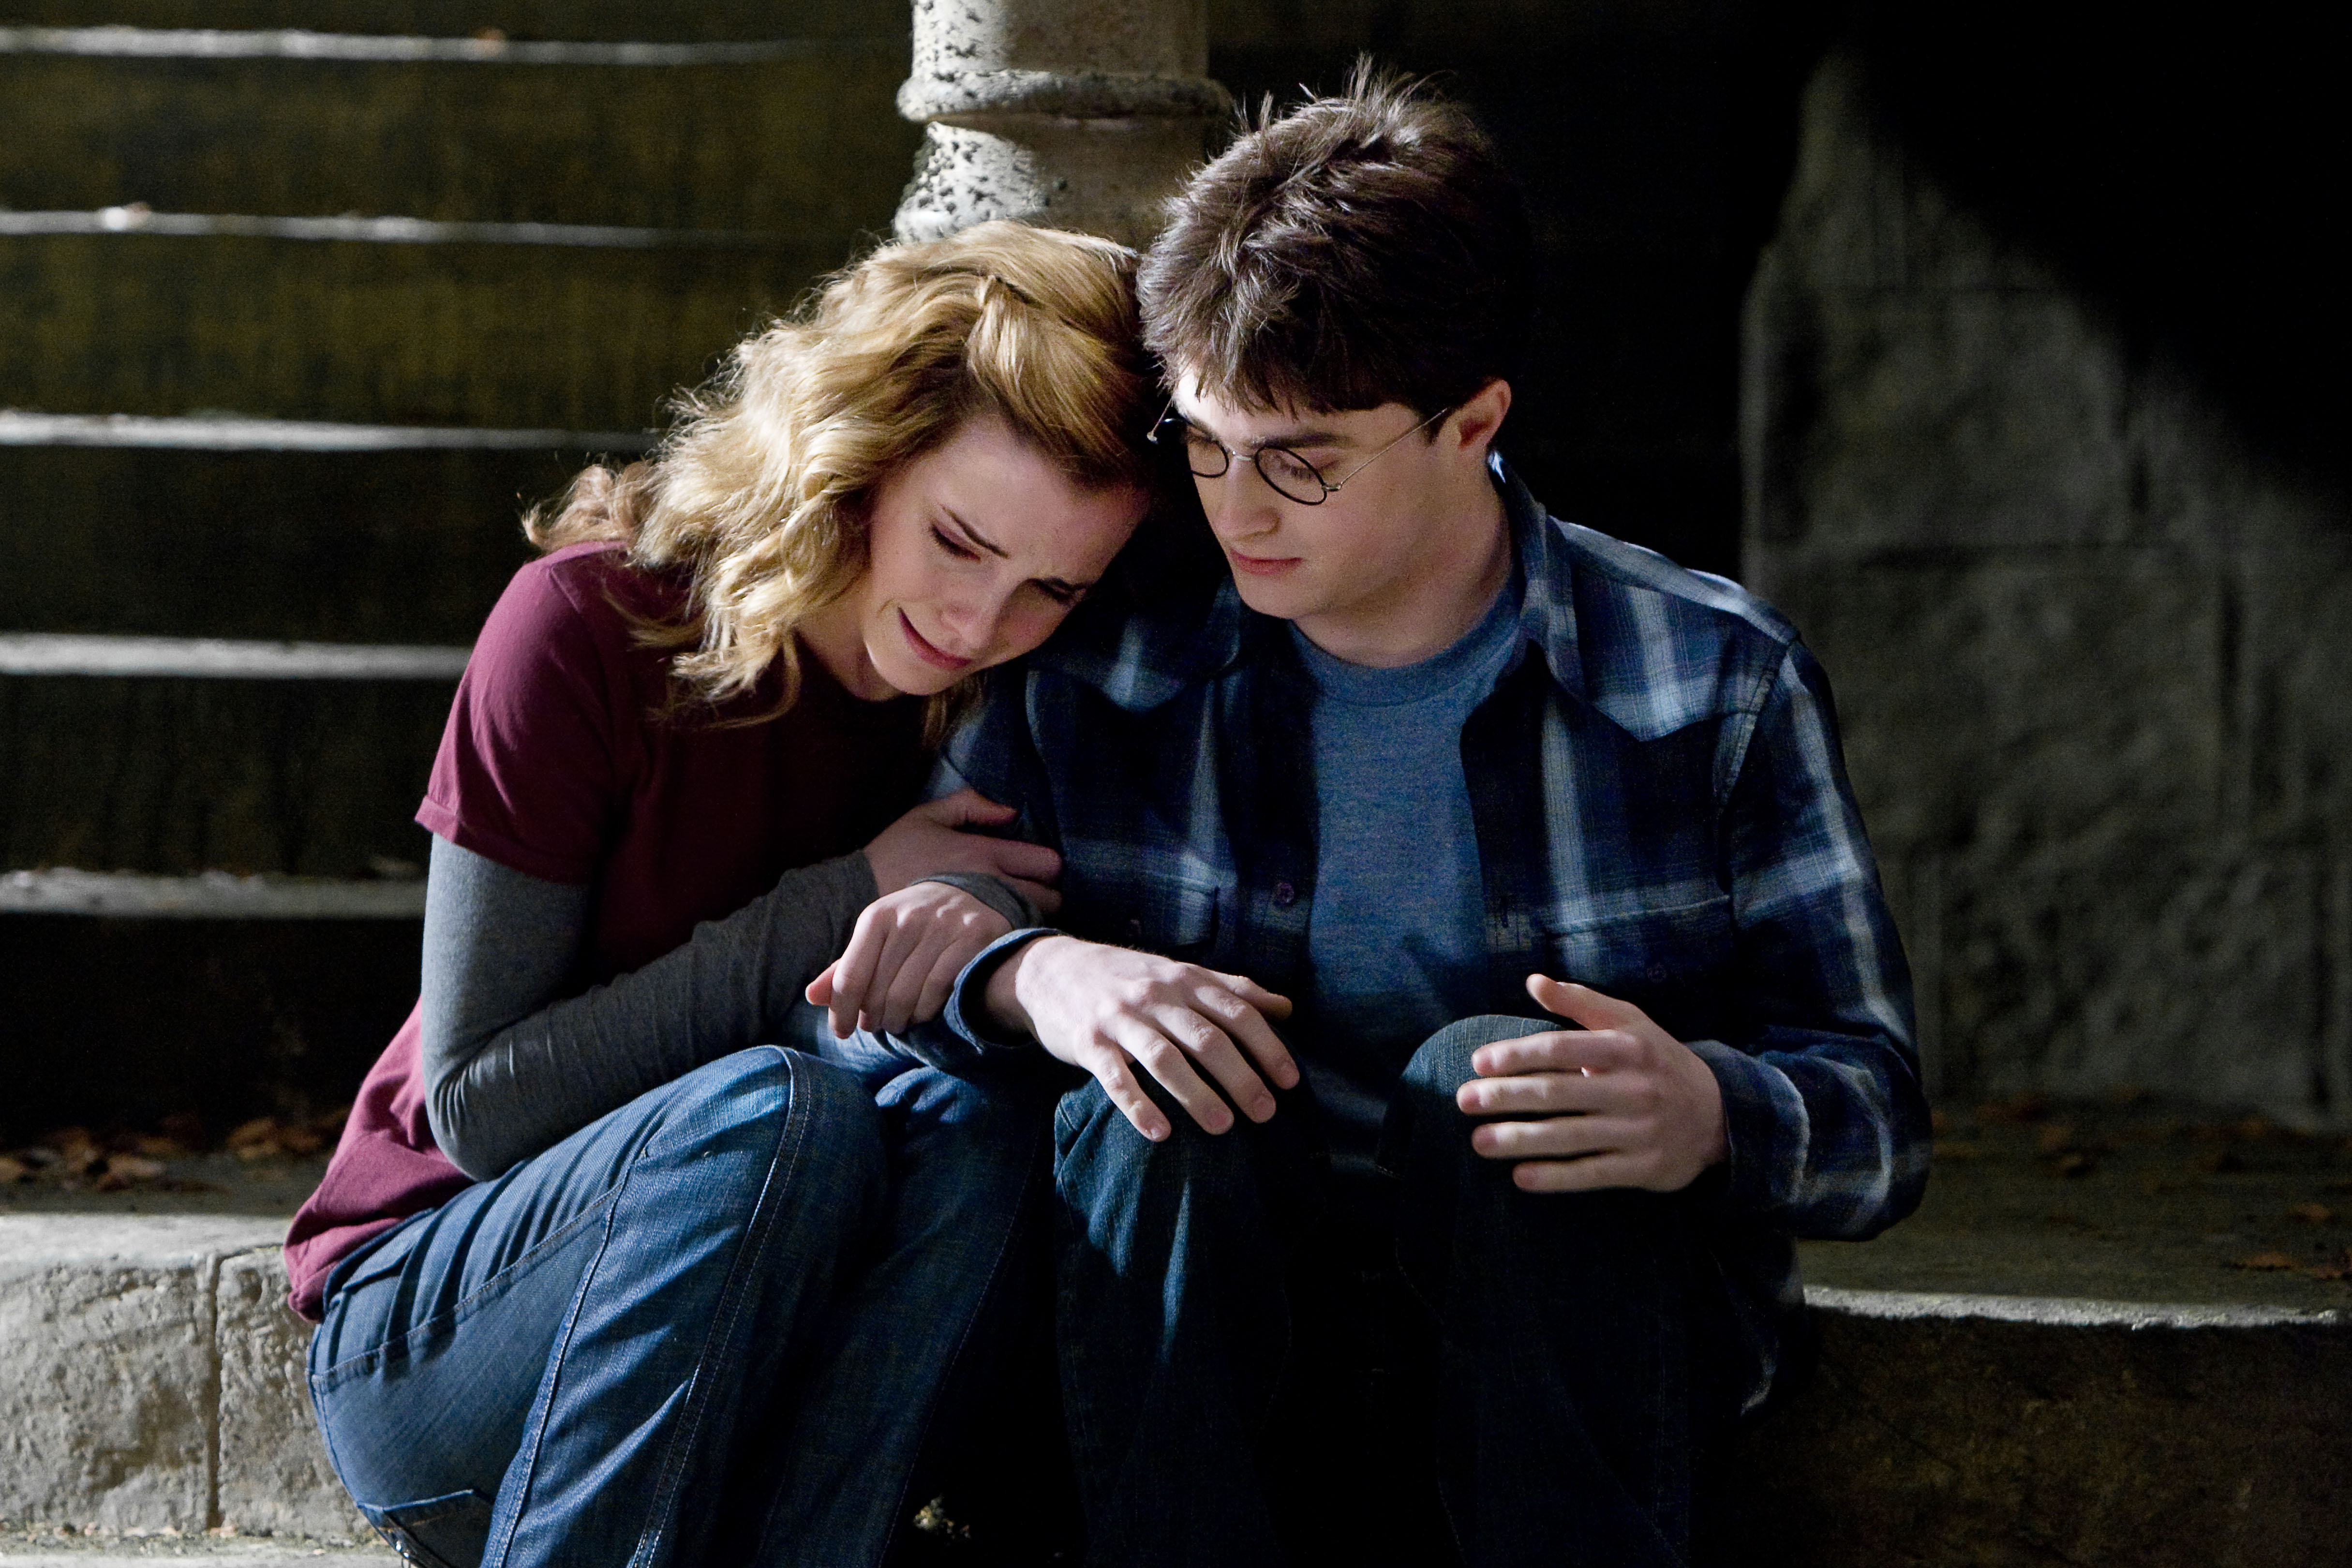 connie lavine add images of hermione in harry potter photo